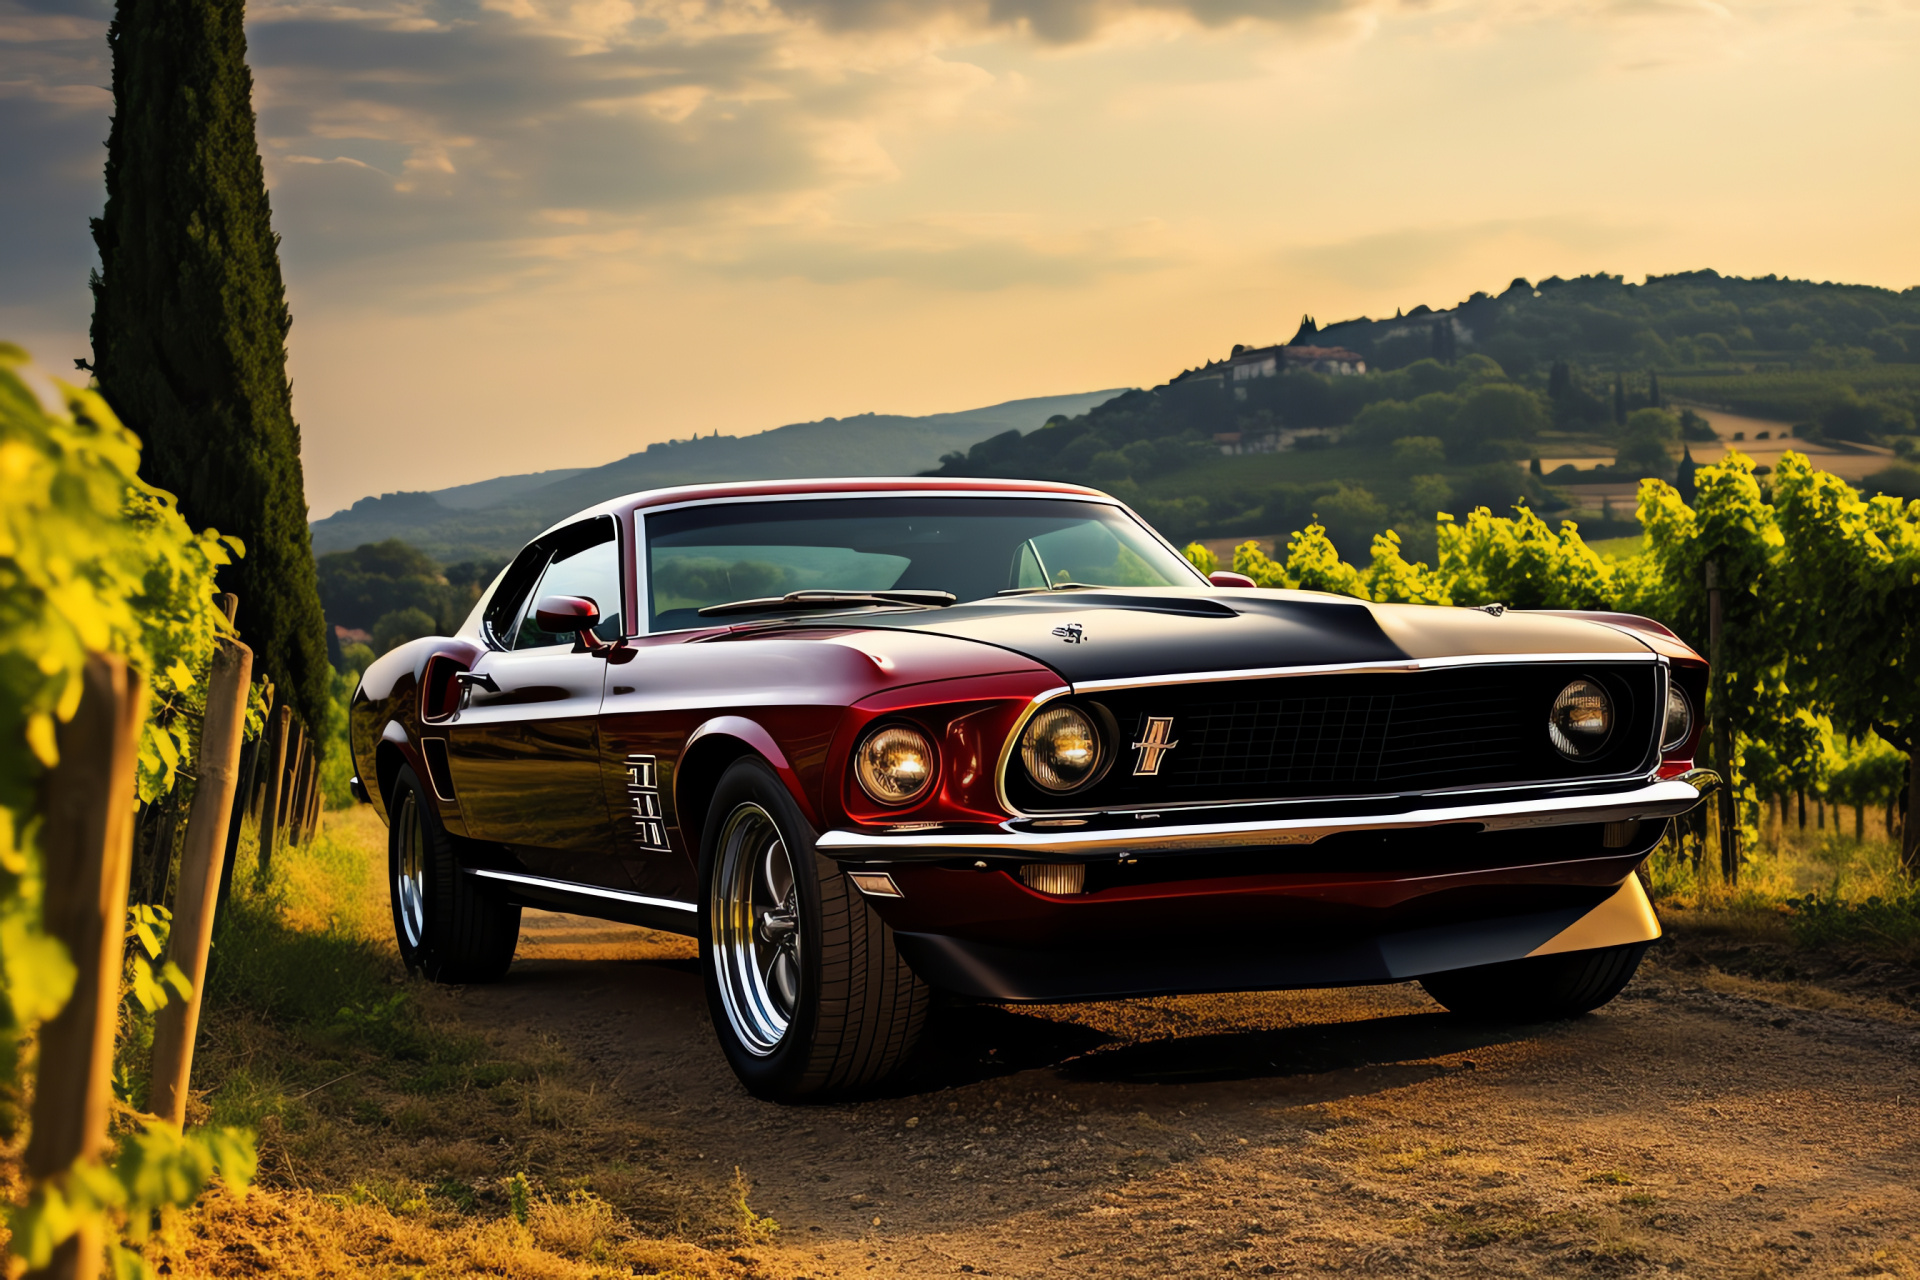 Ford Mustang Mach 1, Tuscan countryside, Classic American muscle, Vineyard landscape, Detailed vehicular design, HD Desktop Image